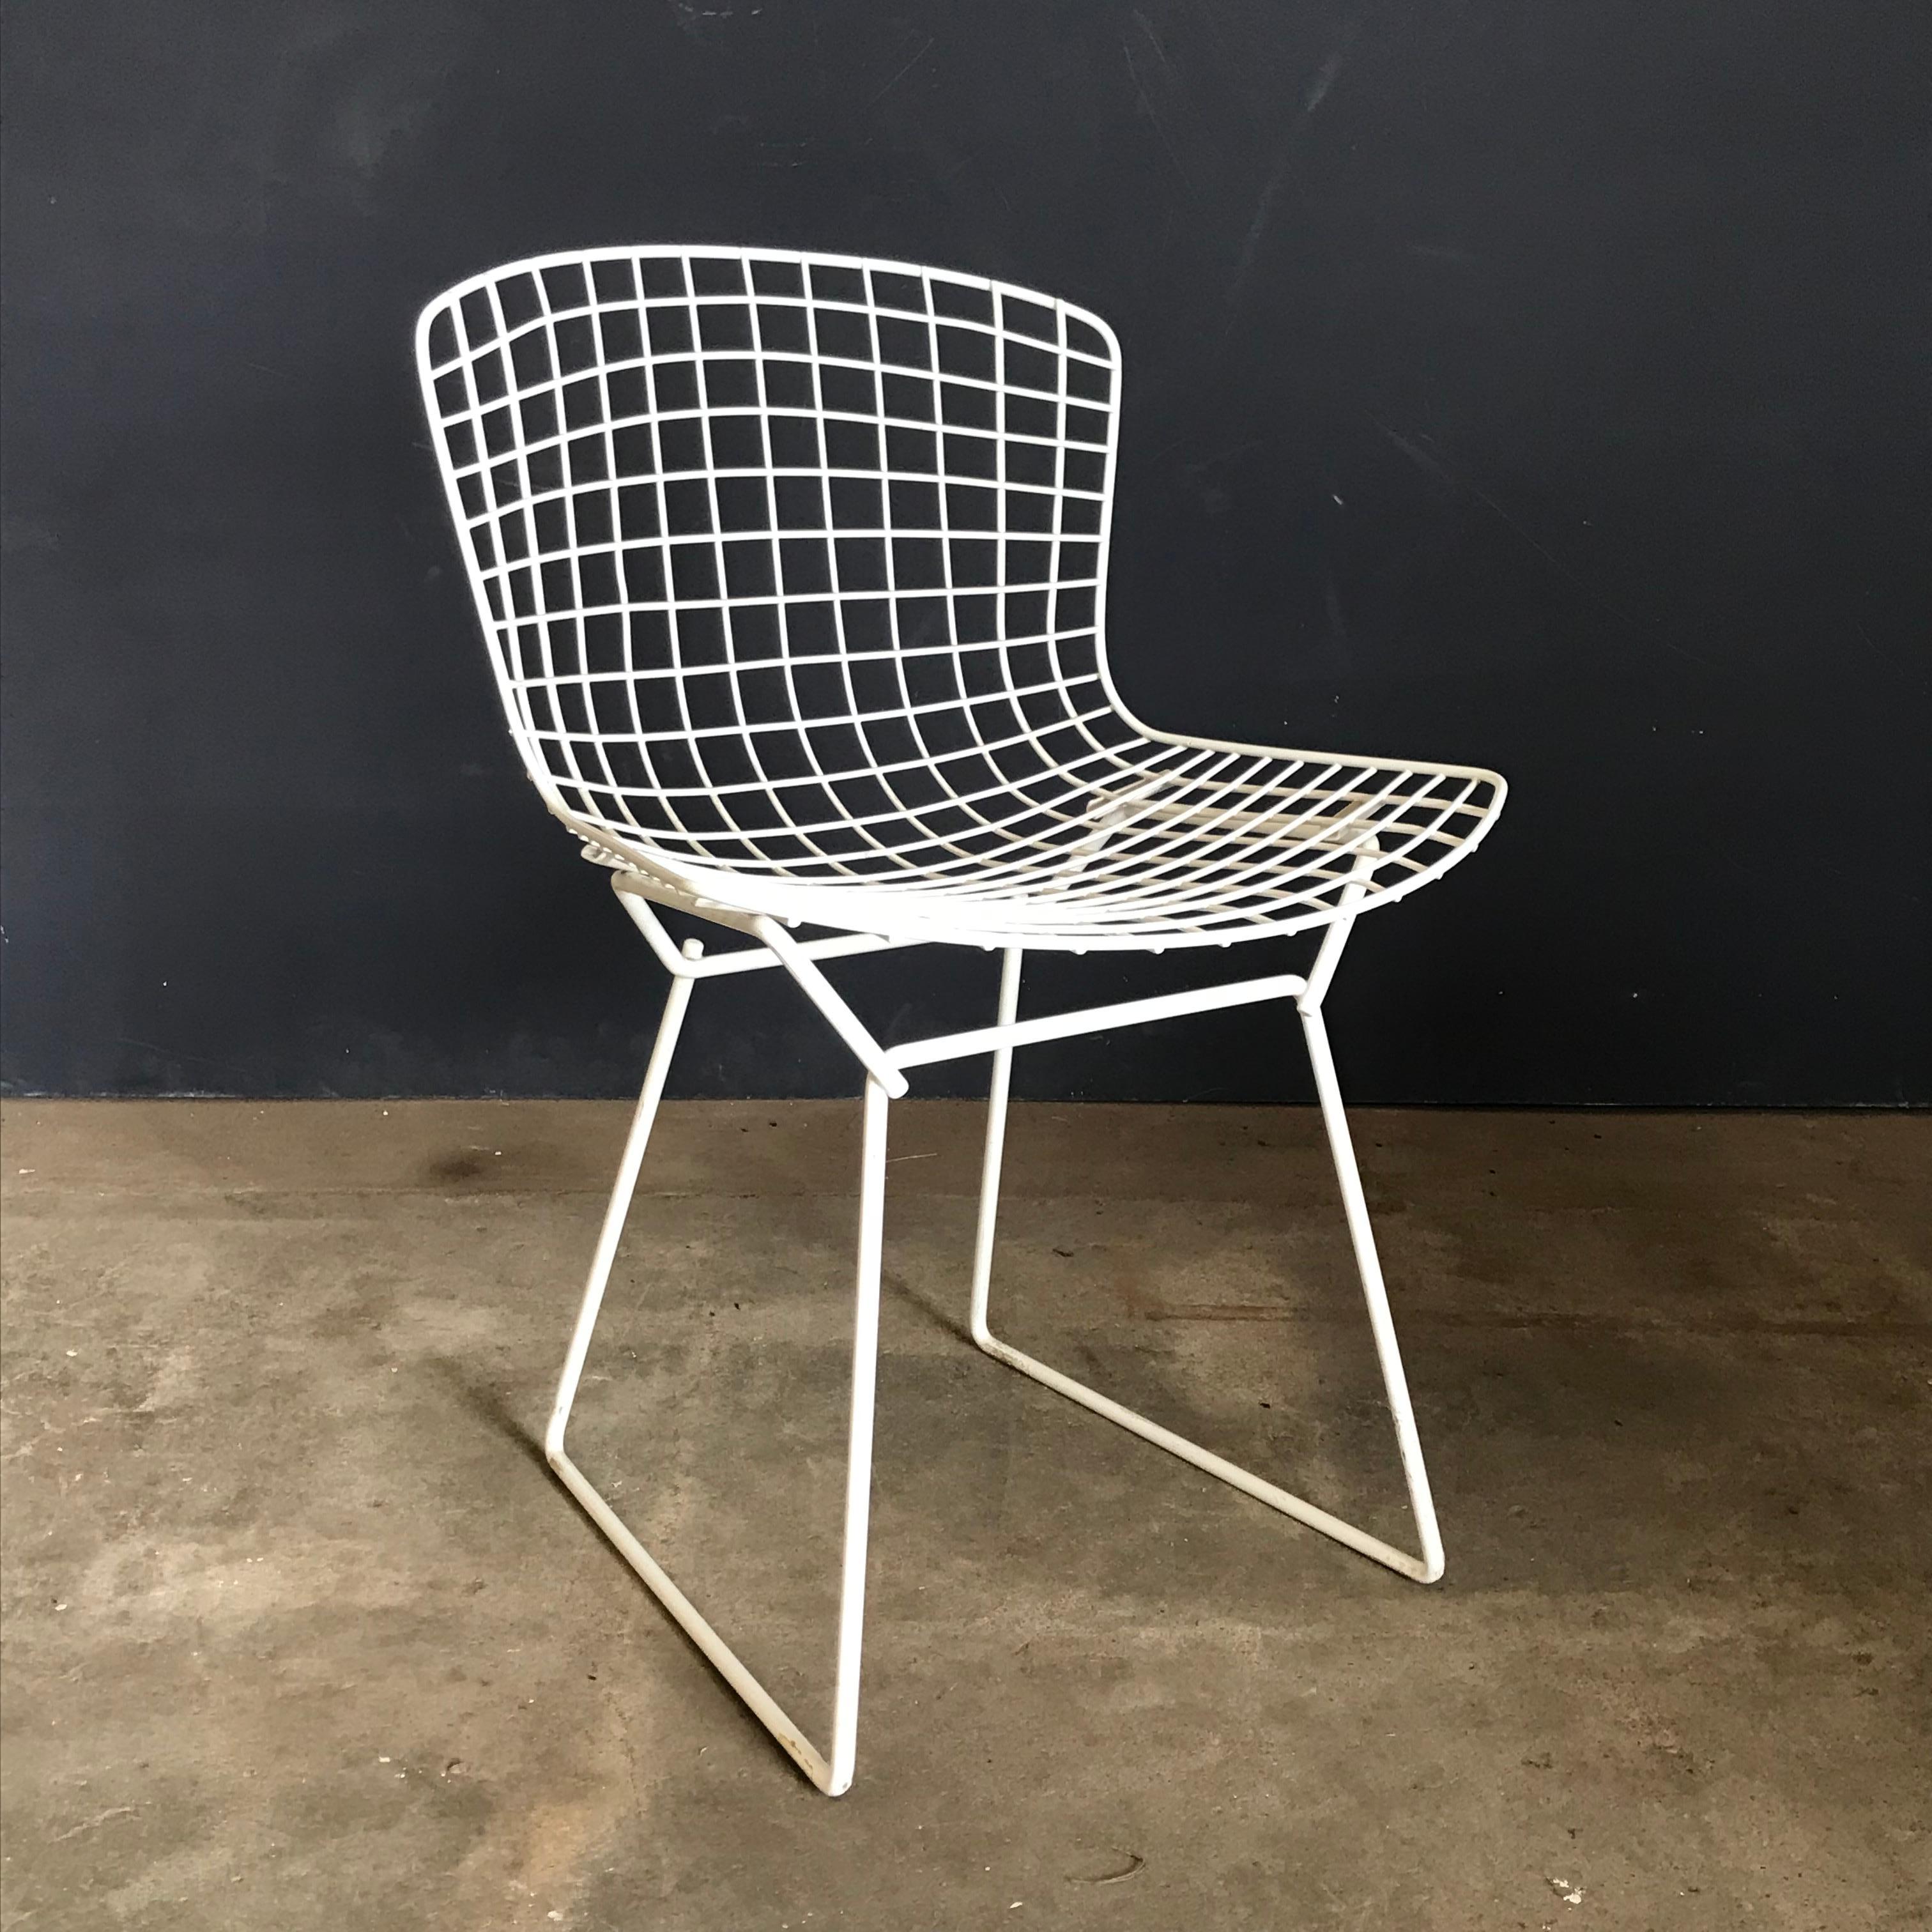 Set of six White Bertoia. The chairs are except for some traces of wear like some black stains and stripes, in good condition. One of the shells has some damage on top (picture #14). All screws are missing and therefore all chairs are unassembled